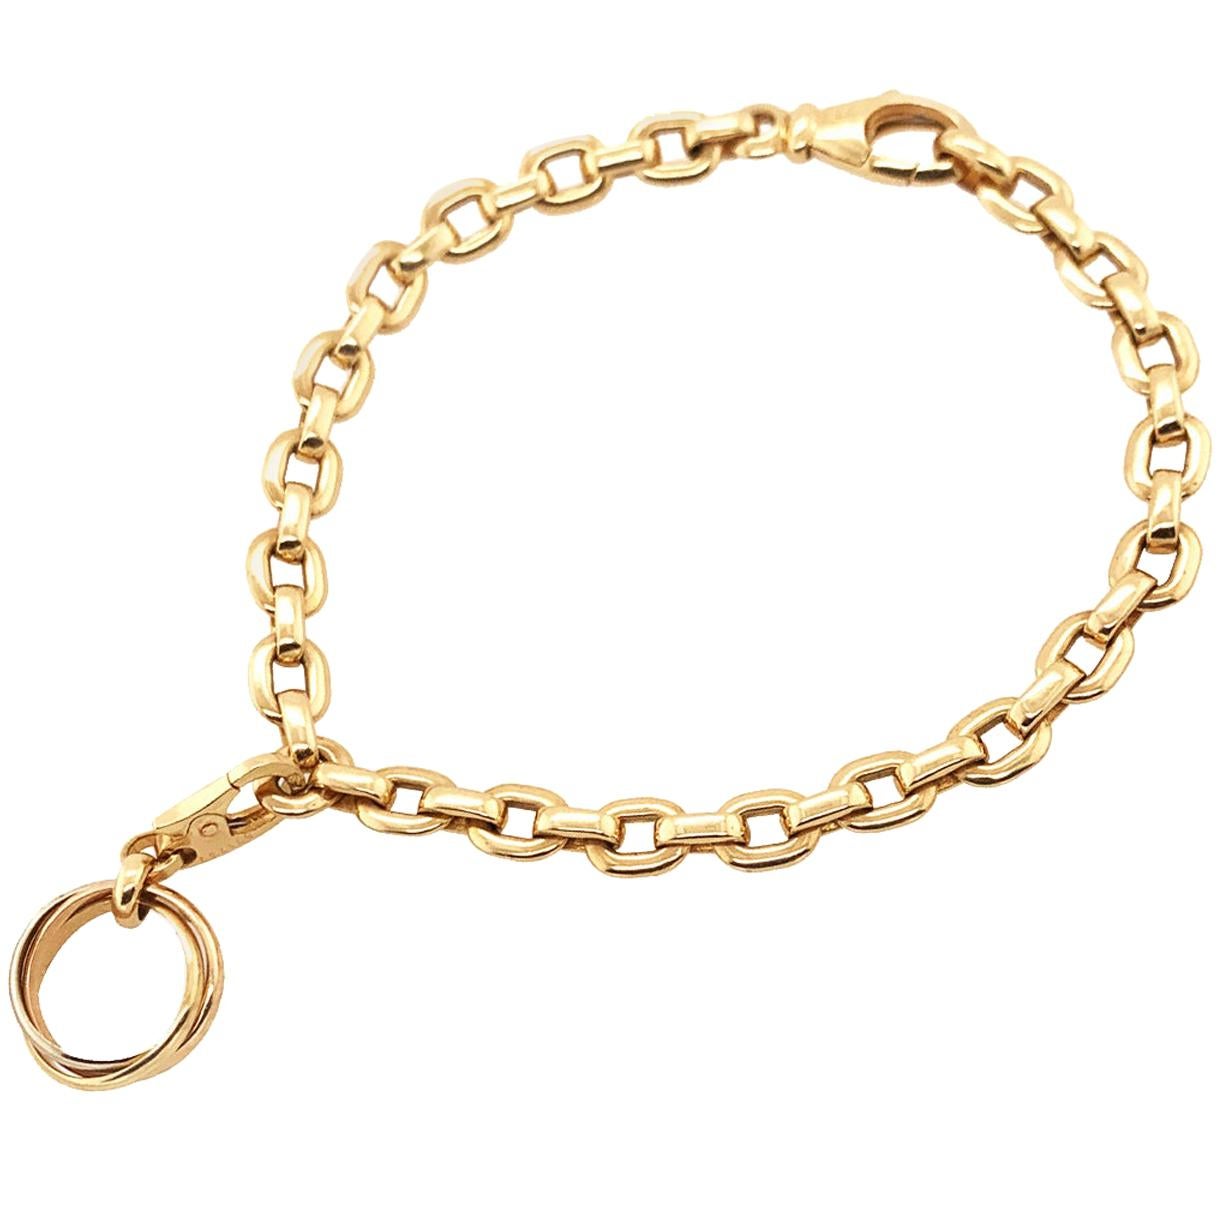 Gold Cartier Trinity Charm Link Bracelet and Charm